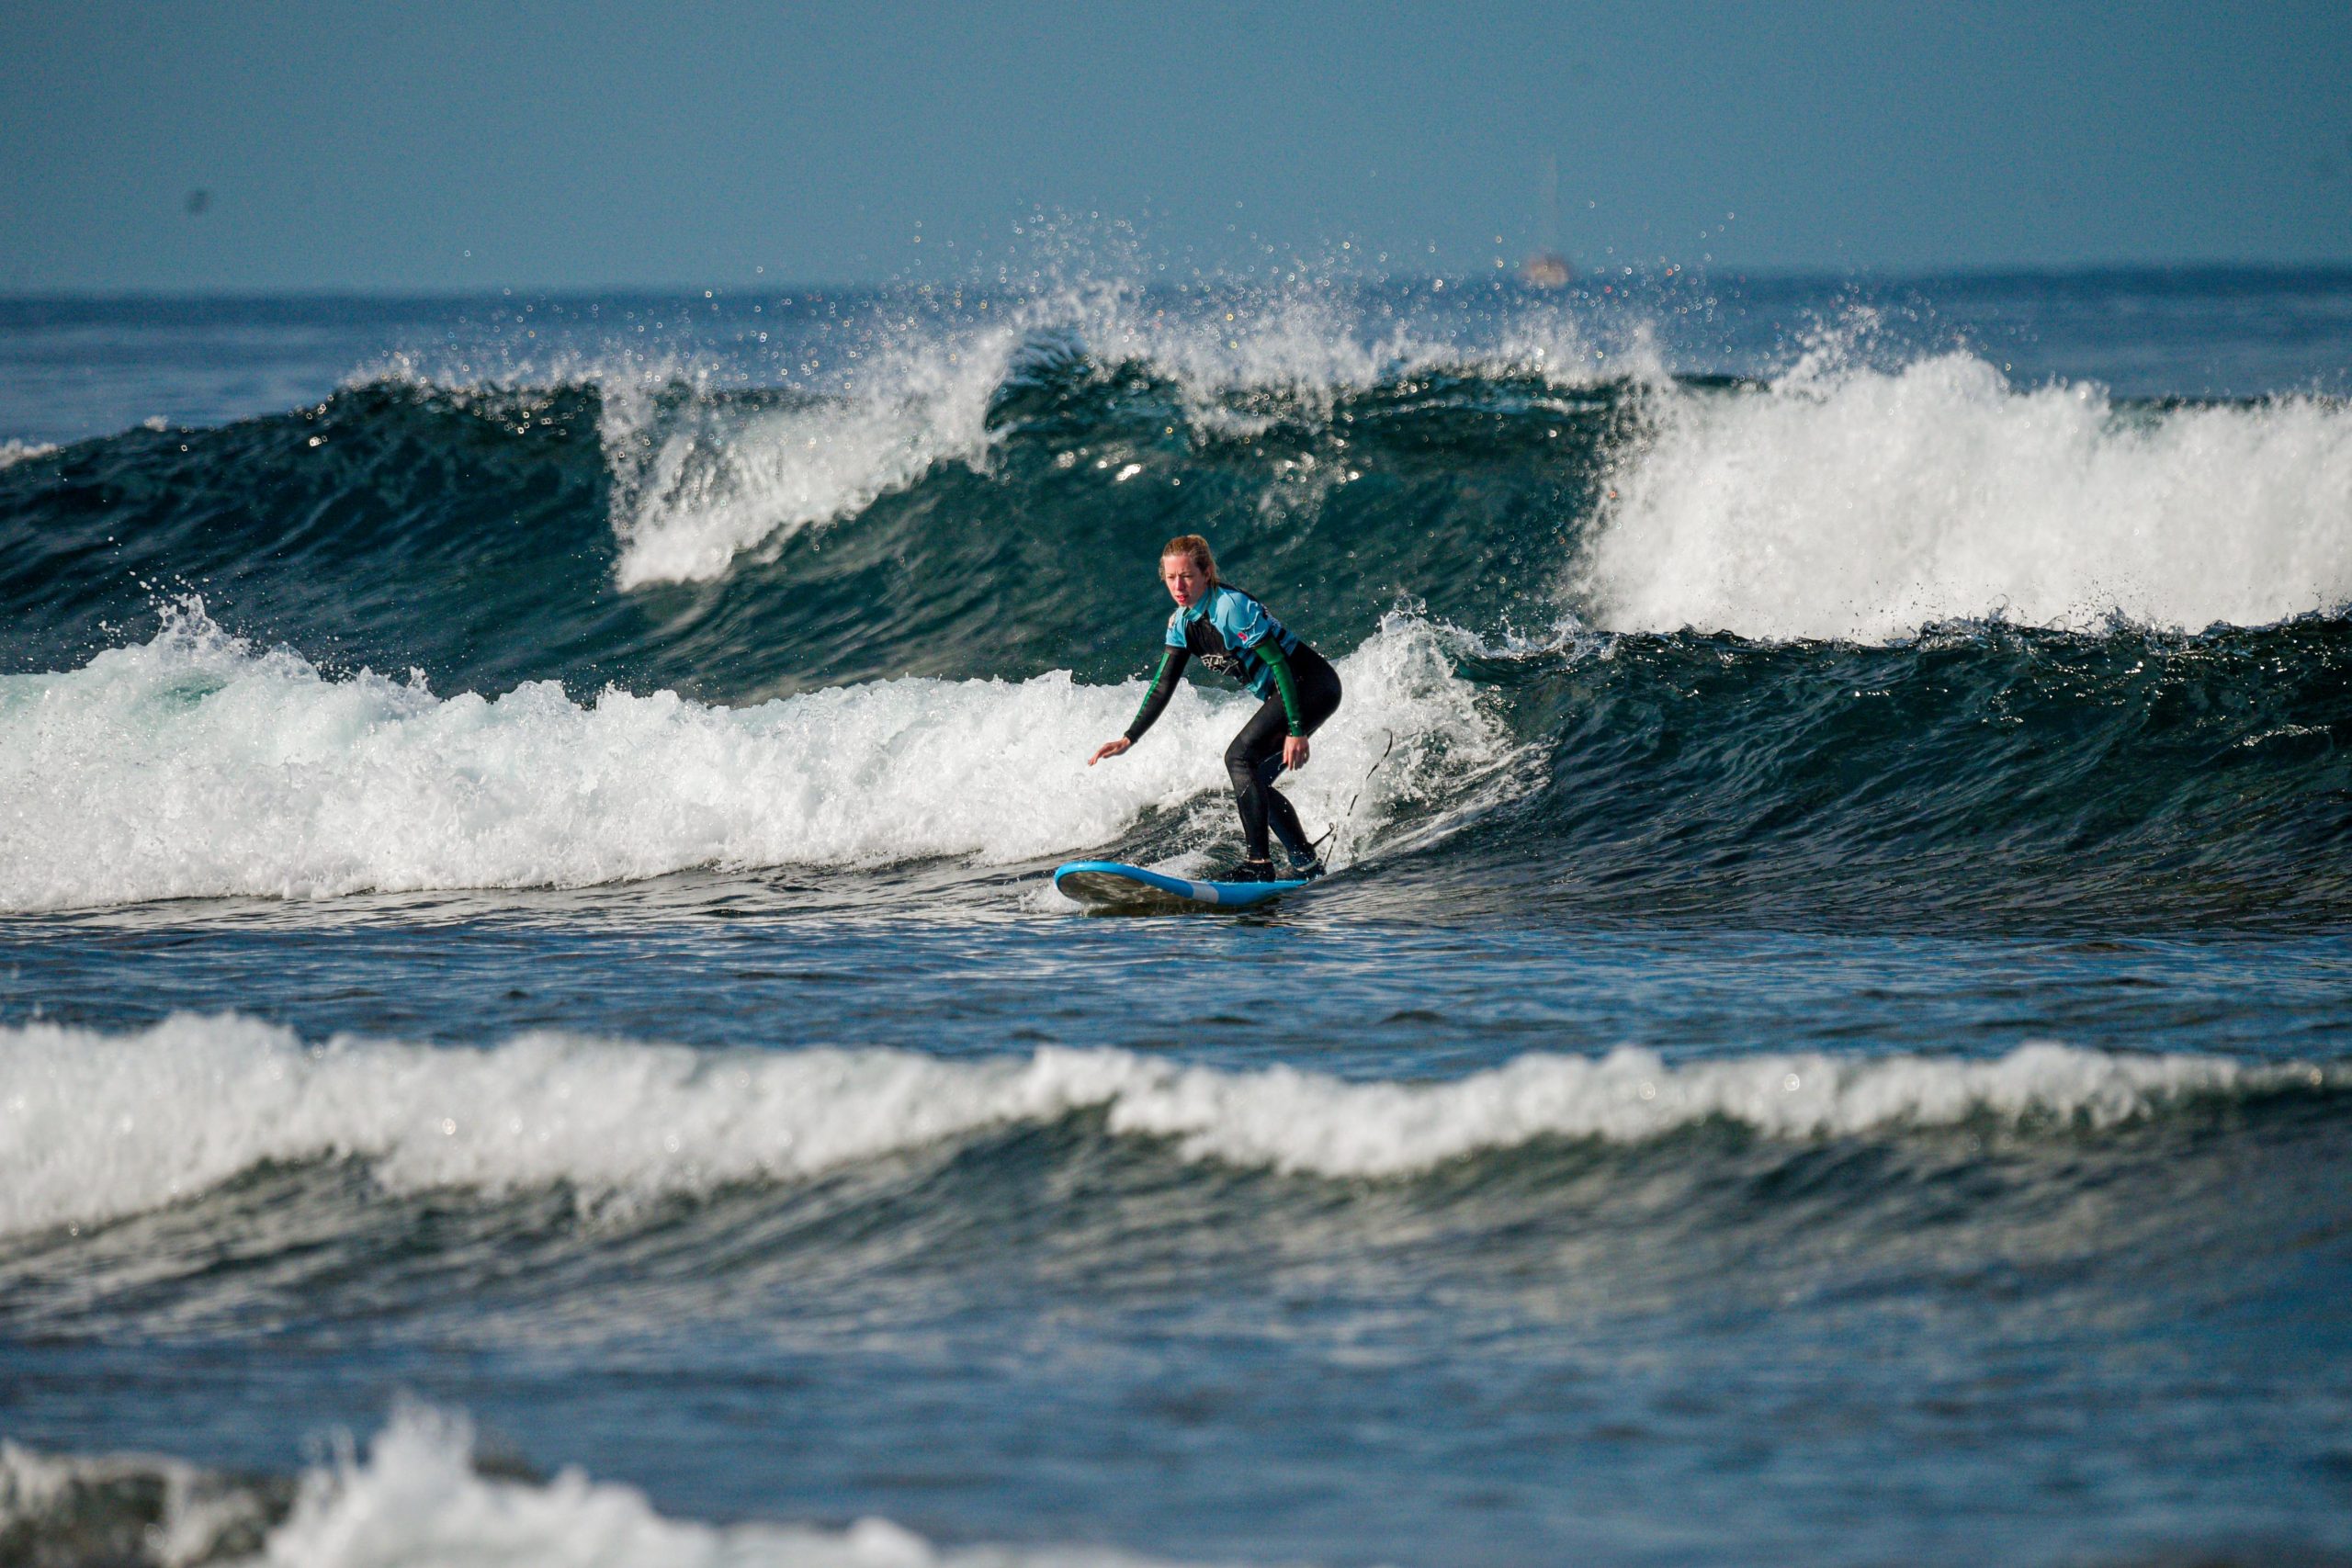 Blackstone Surf Center student surfing in Playa las Américas in Tenerife during a surf lesson